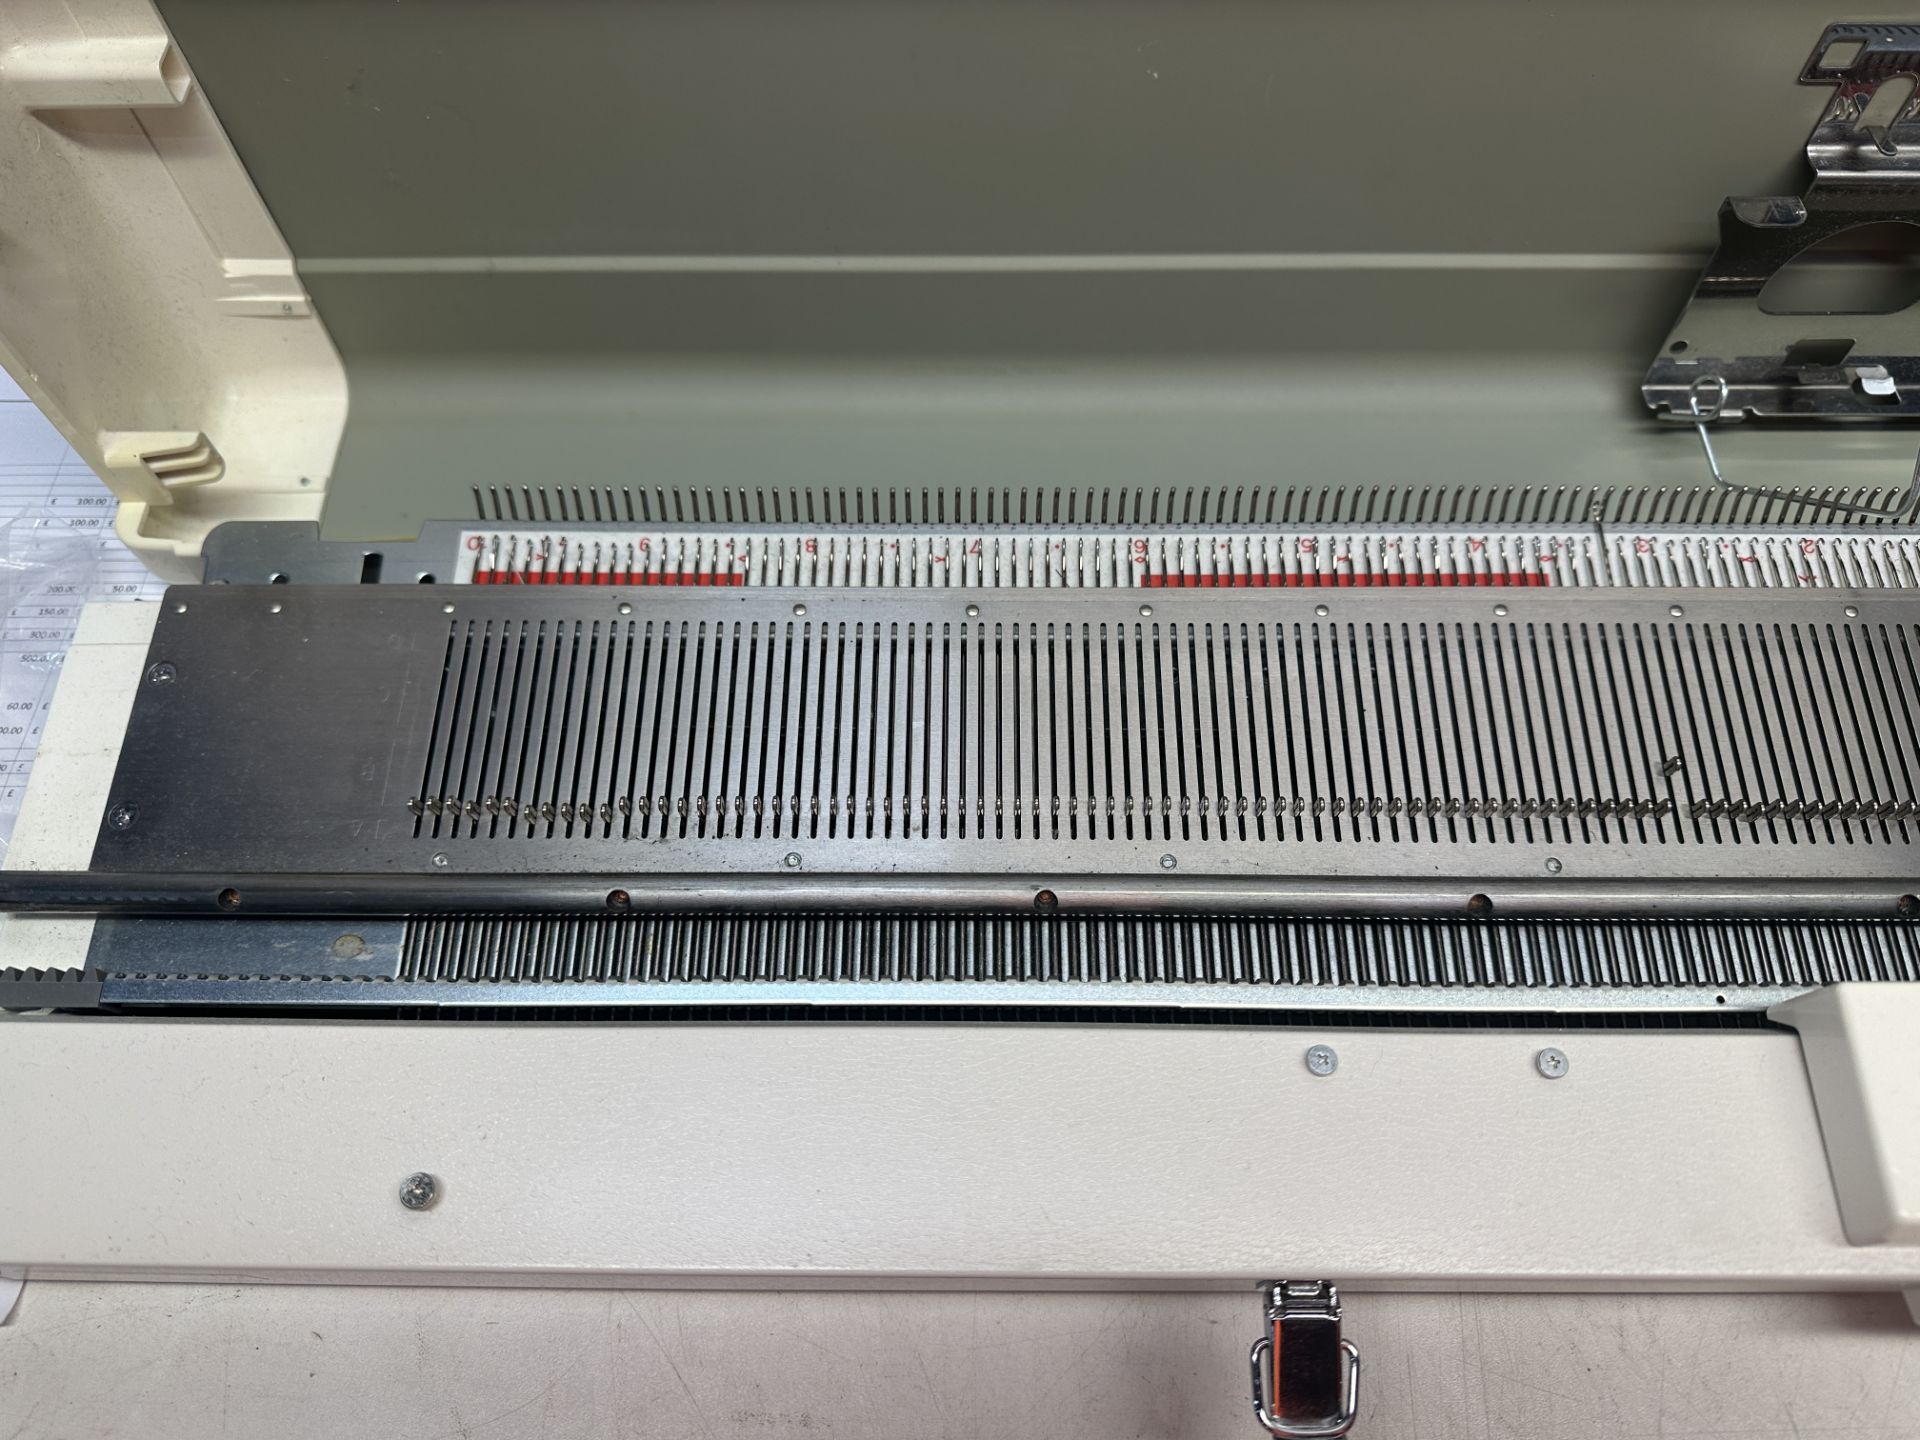 Silver Reed SK 280 Knitting Machine - Image 6 of 10